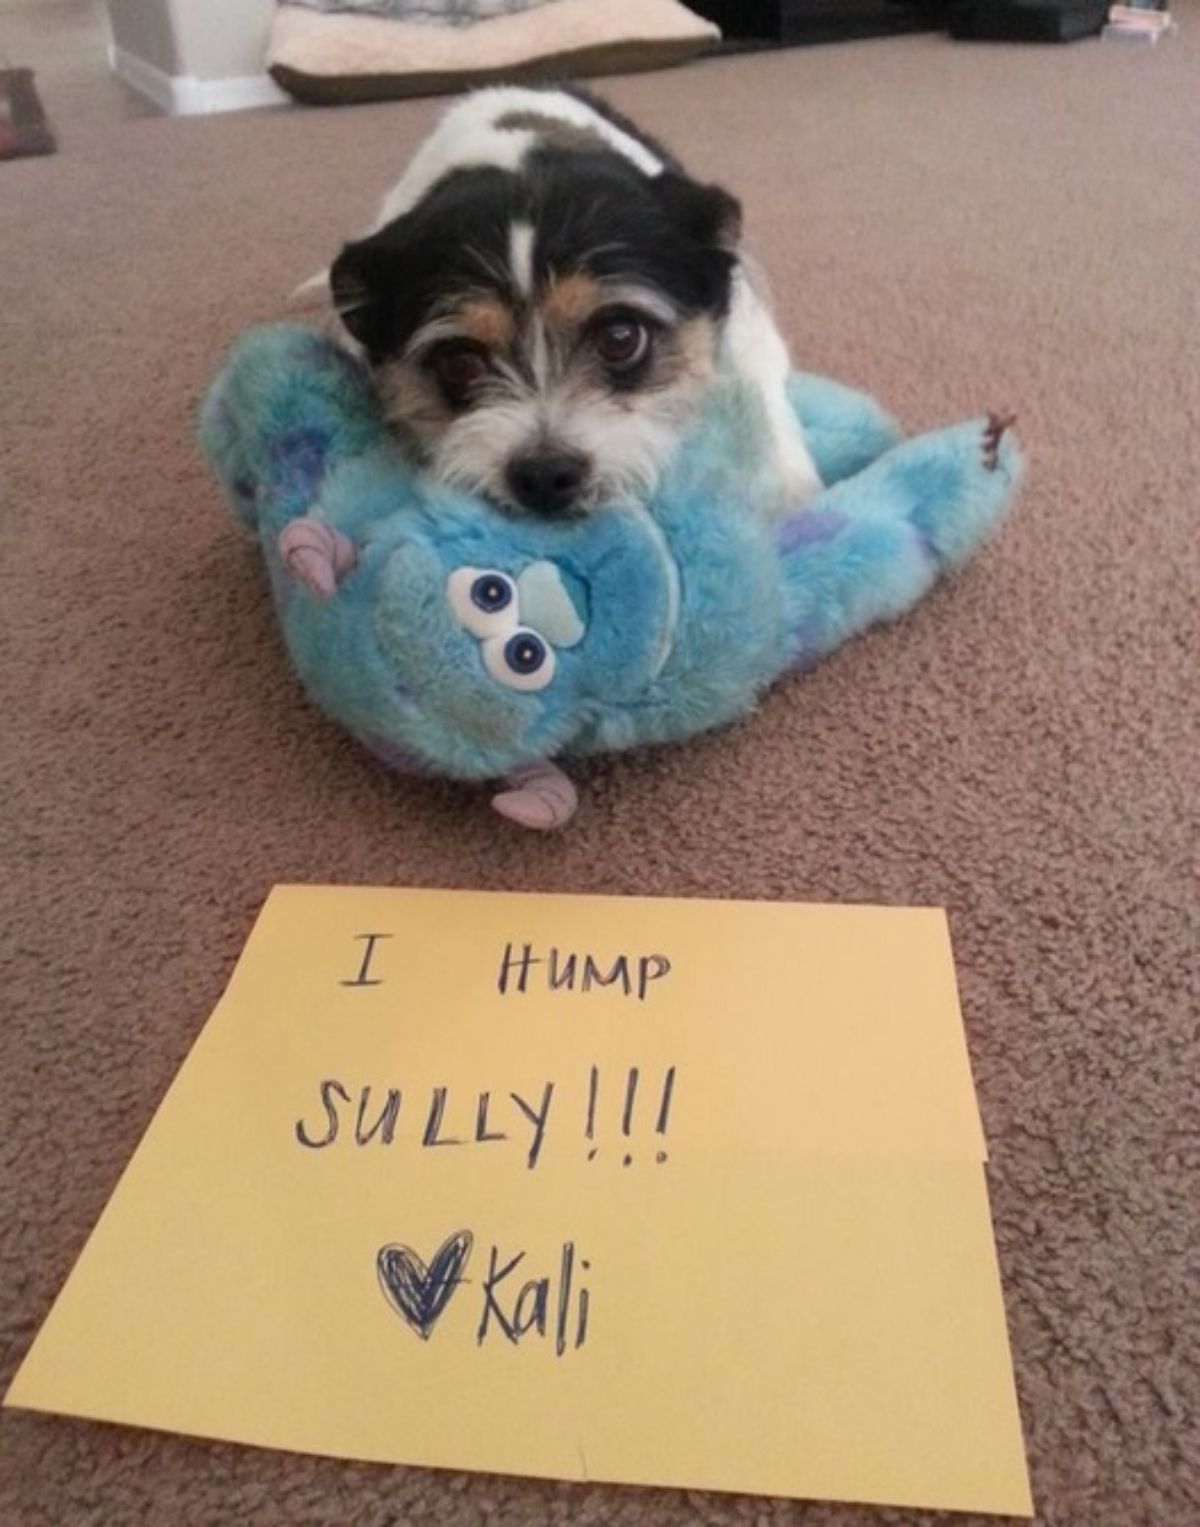 small white black and brown dog cuddling with a blue sully stuffed toy with a note saying "I hump Sully - Kali"